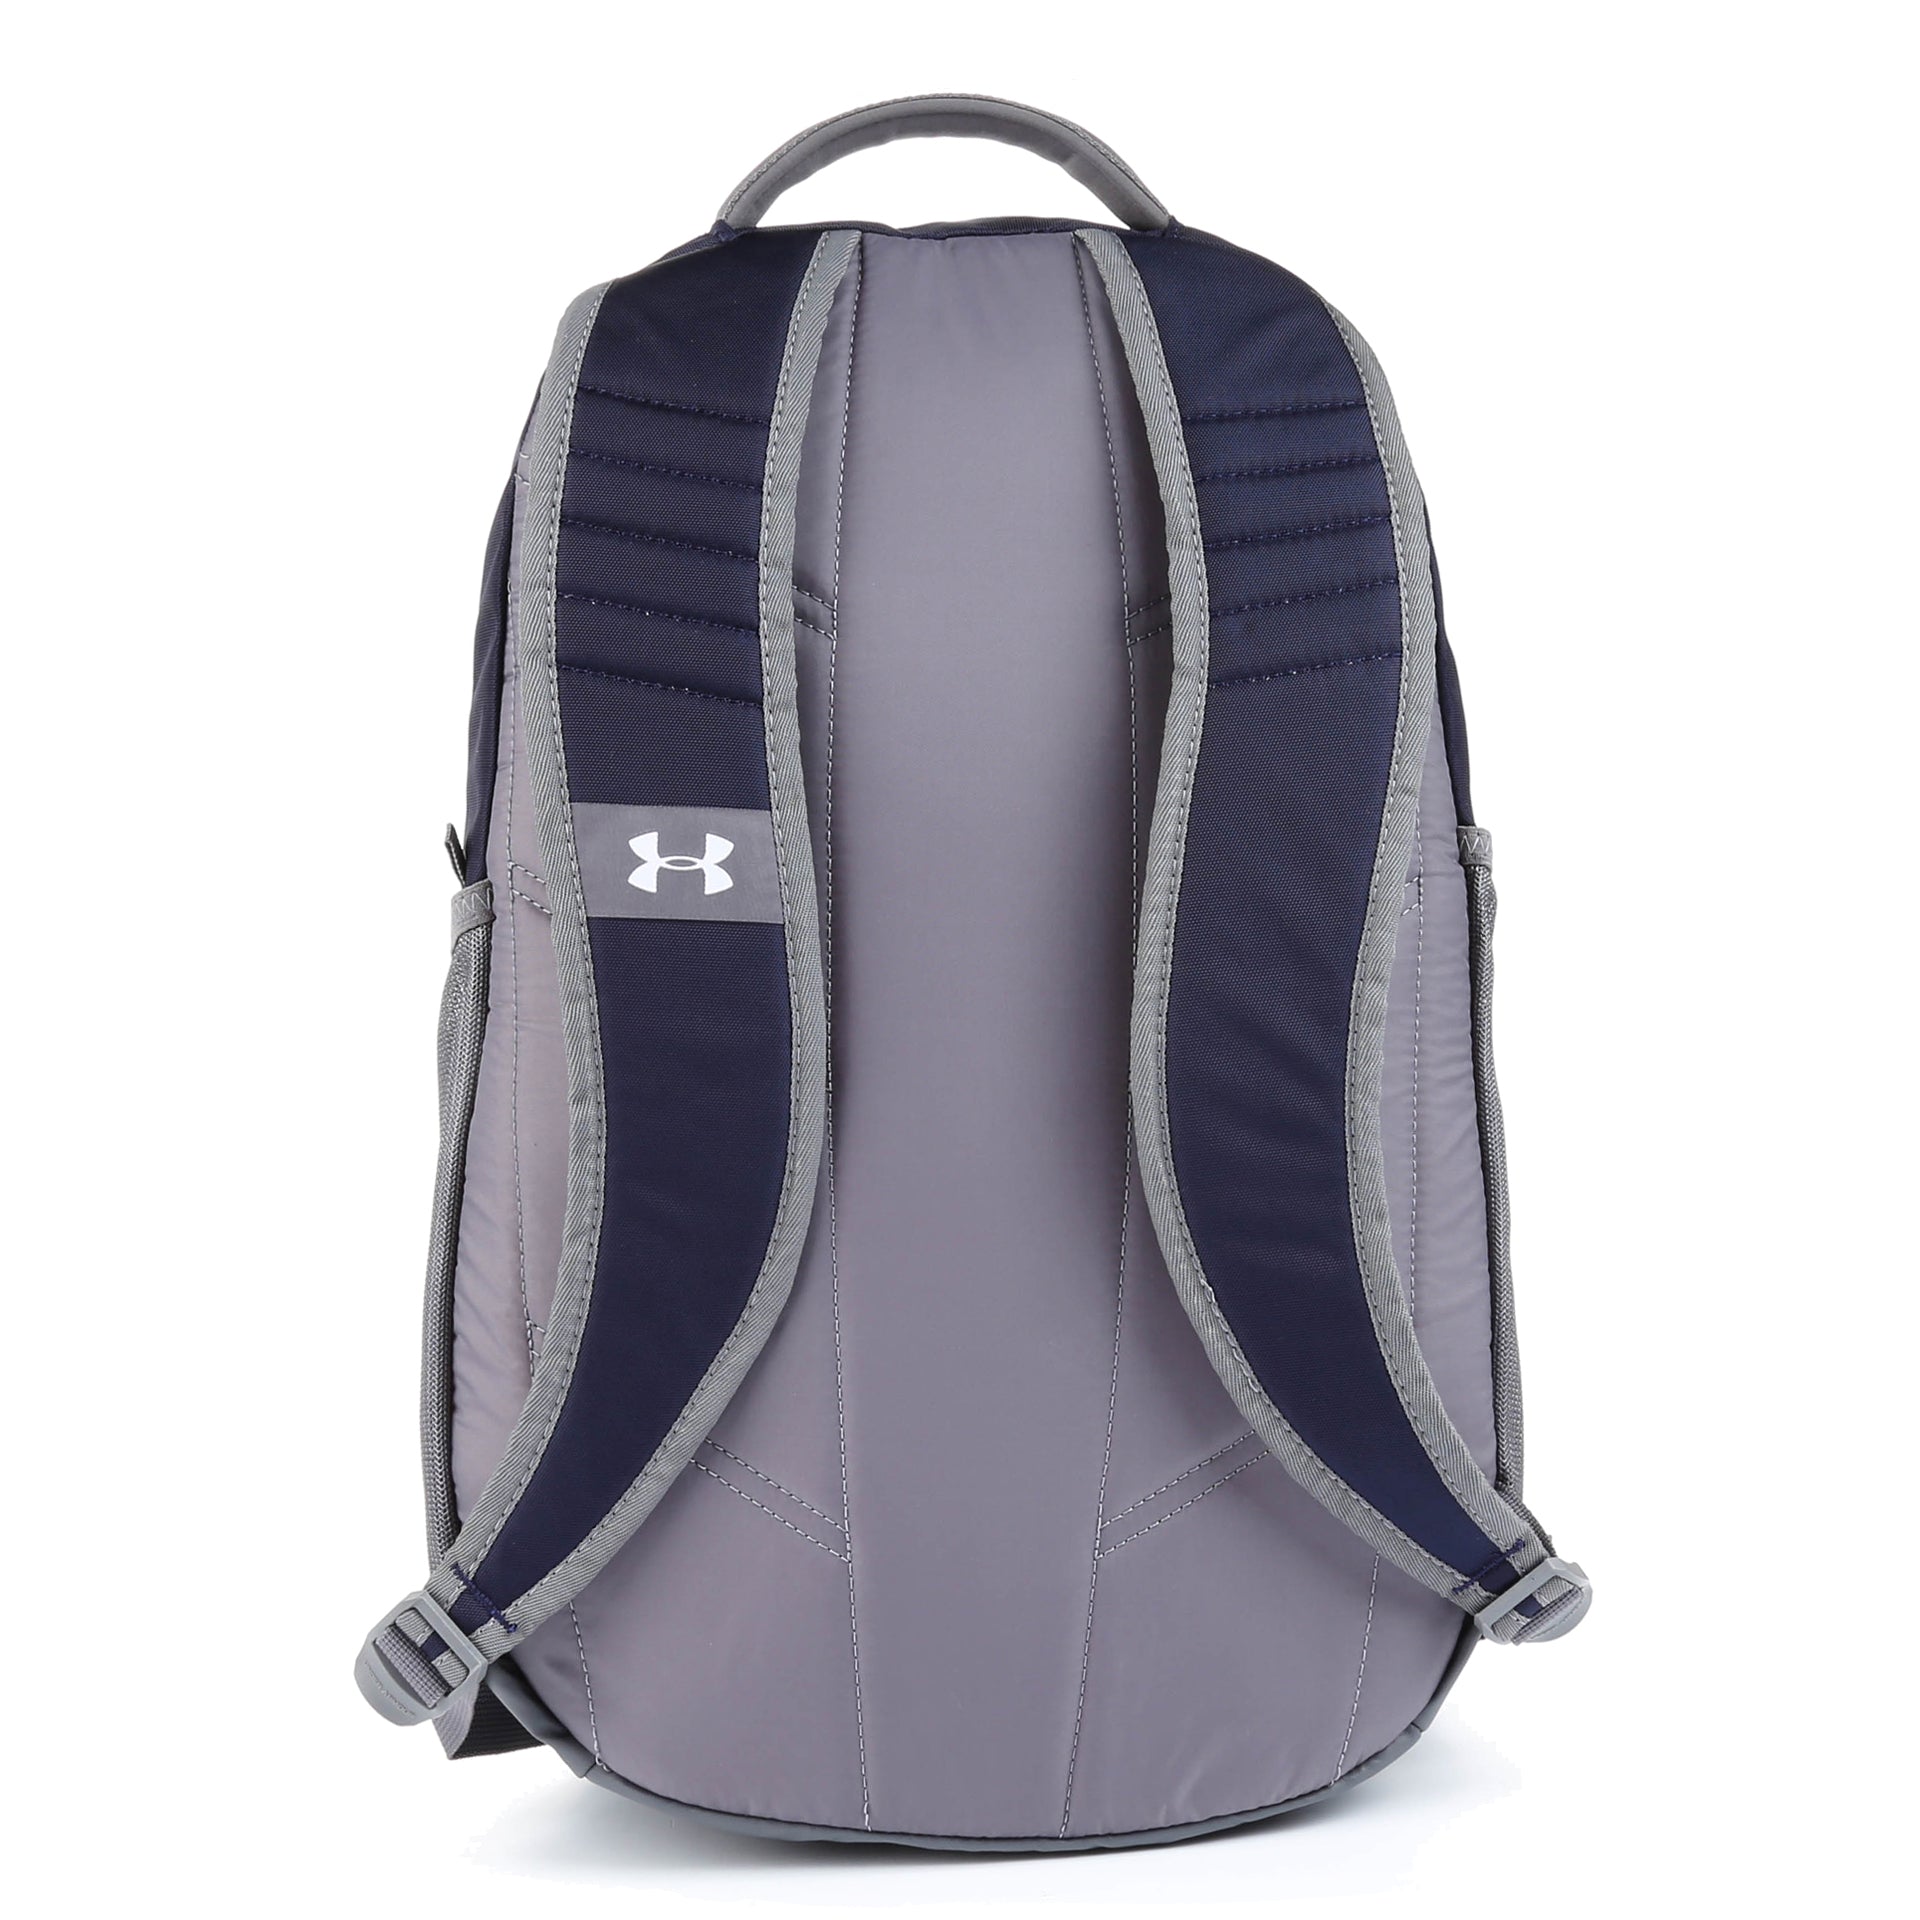 Under Armour Hustle 3.0 Backpack, Midnight Navy (411)/Cape Coral